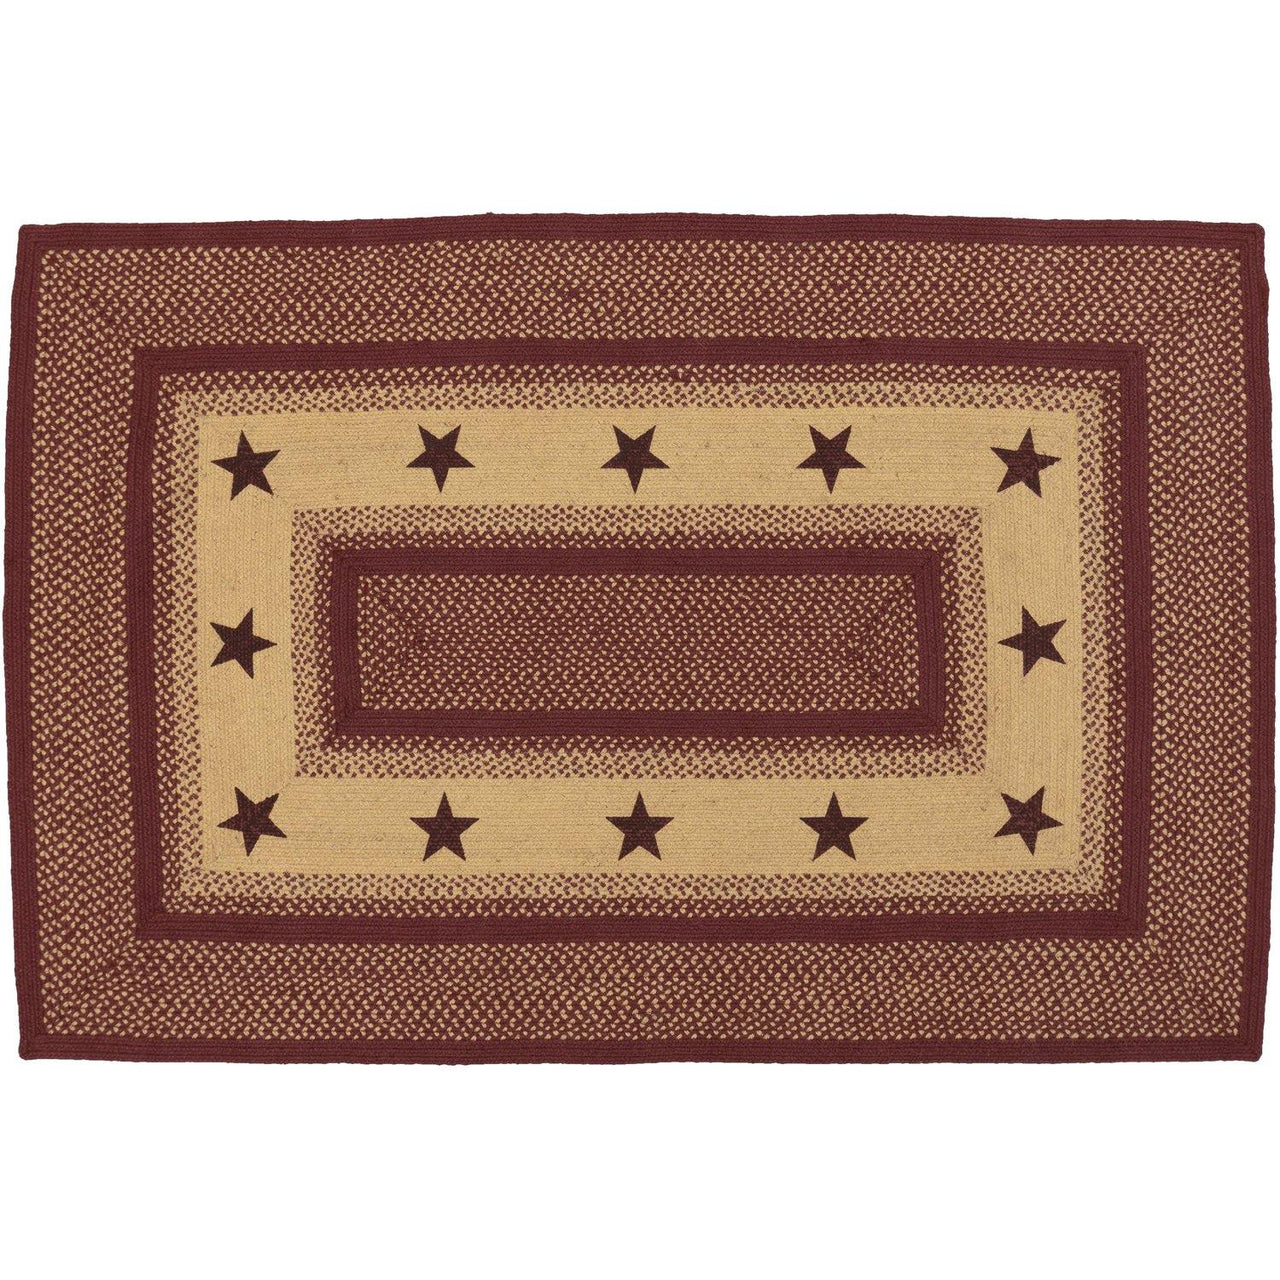 Burgundy Red Primitive Jute Braided Rug Rect Stencil Stars 4'x6' with Rug Pad VHC Brands - The Fox Decor